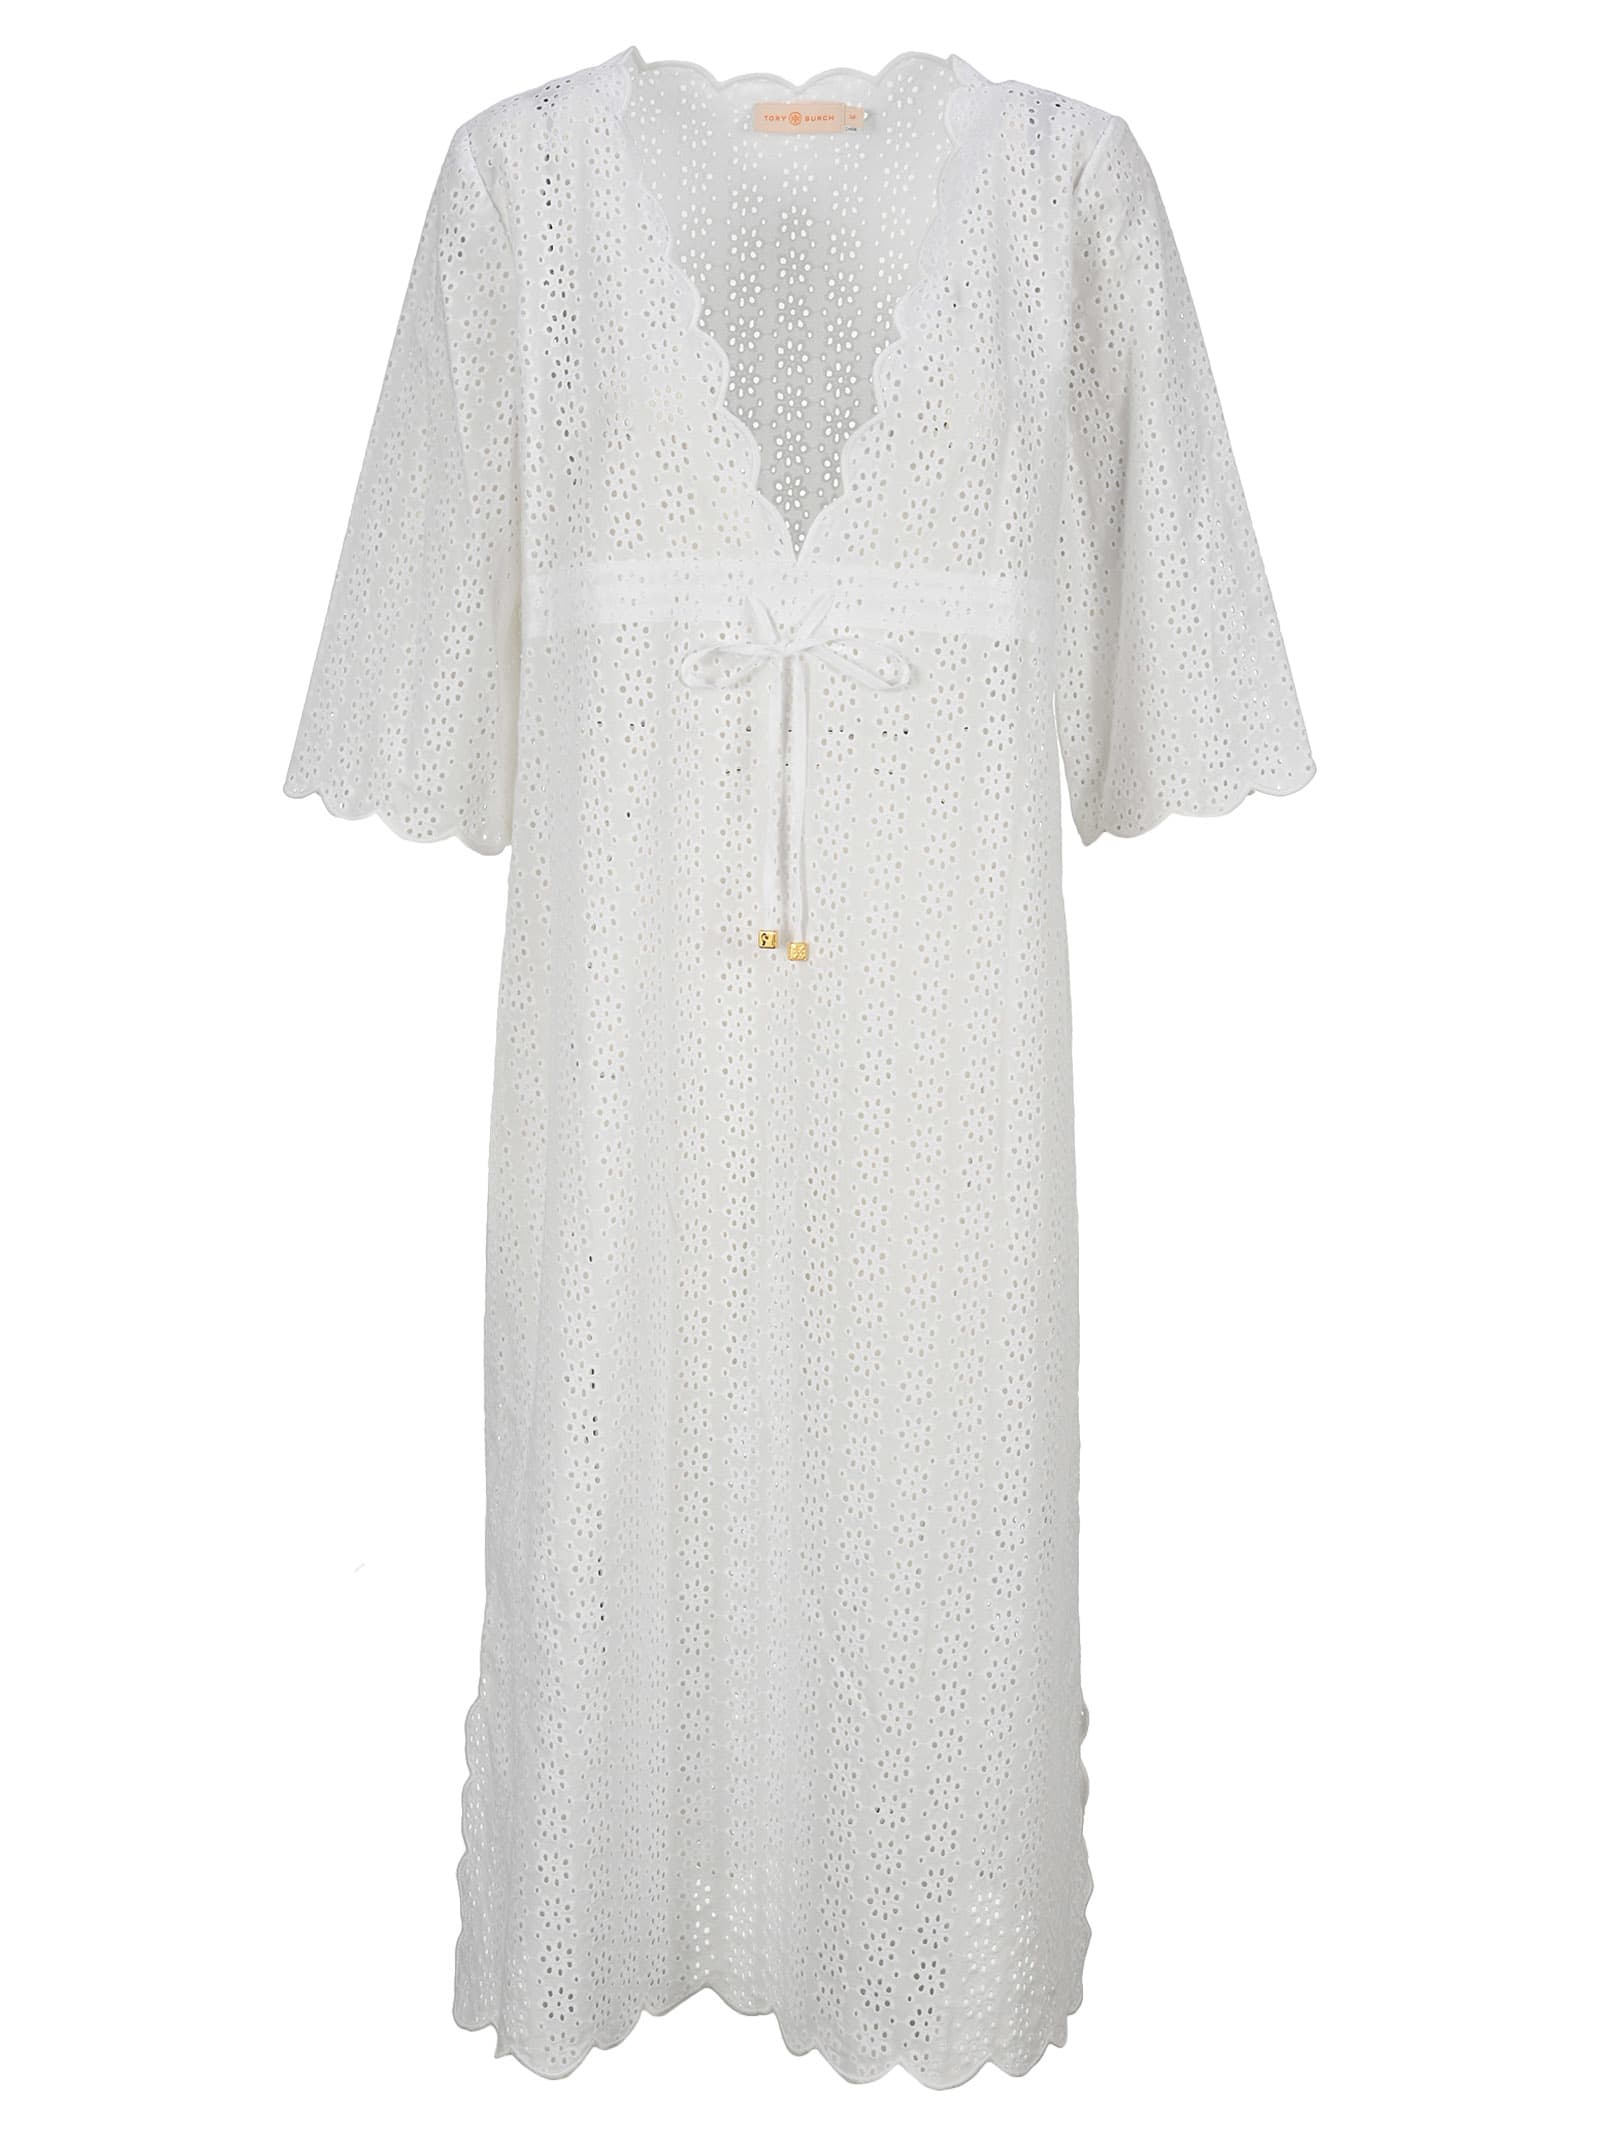 Photo of  Tory Burch Broderie Beach Tunic- shop Tory Burch Dresses online sales